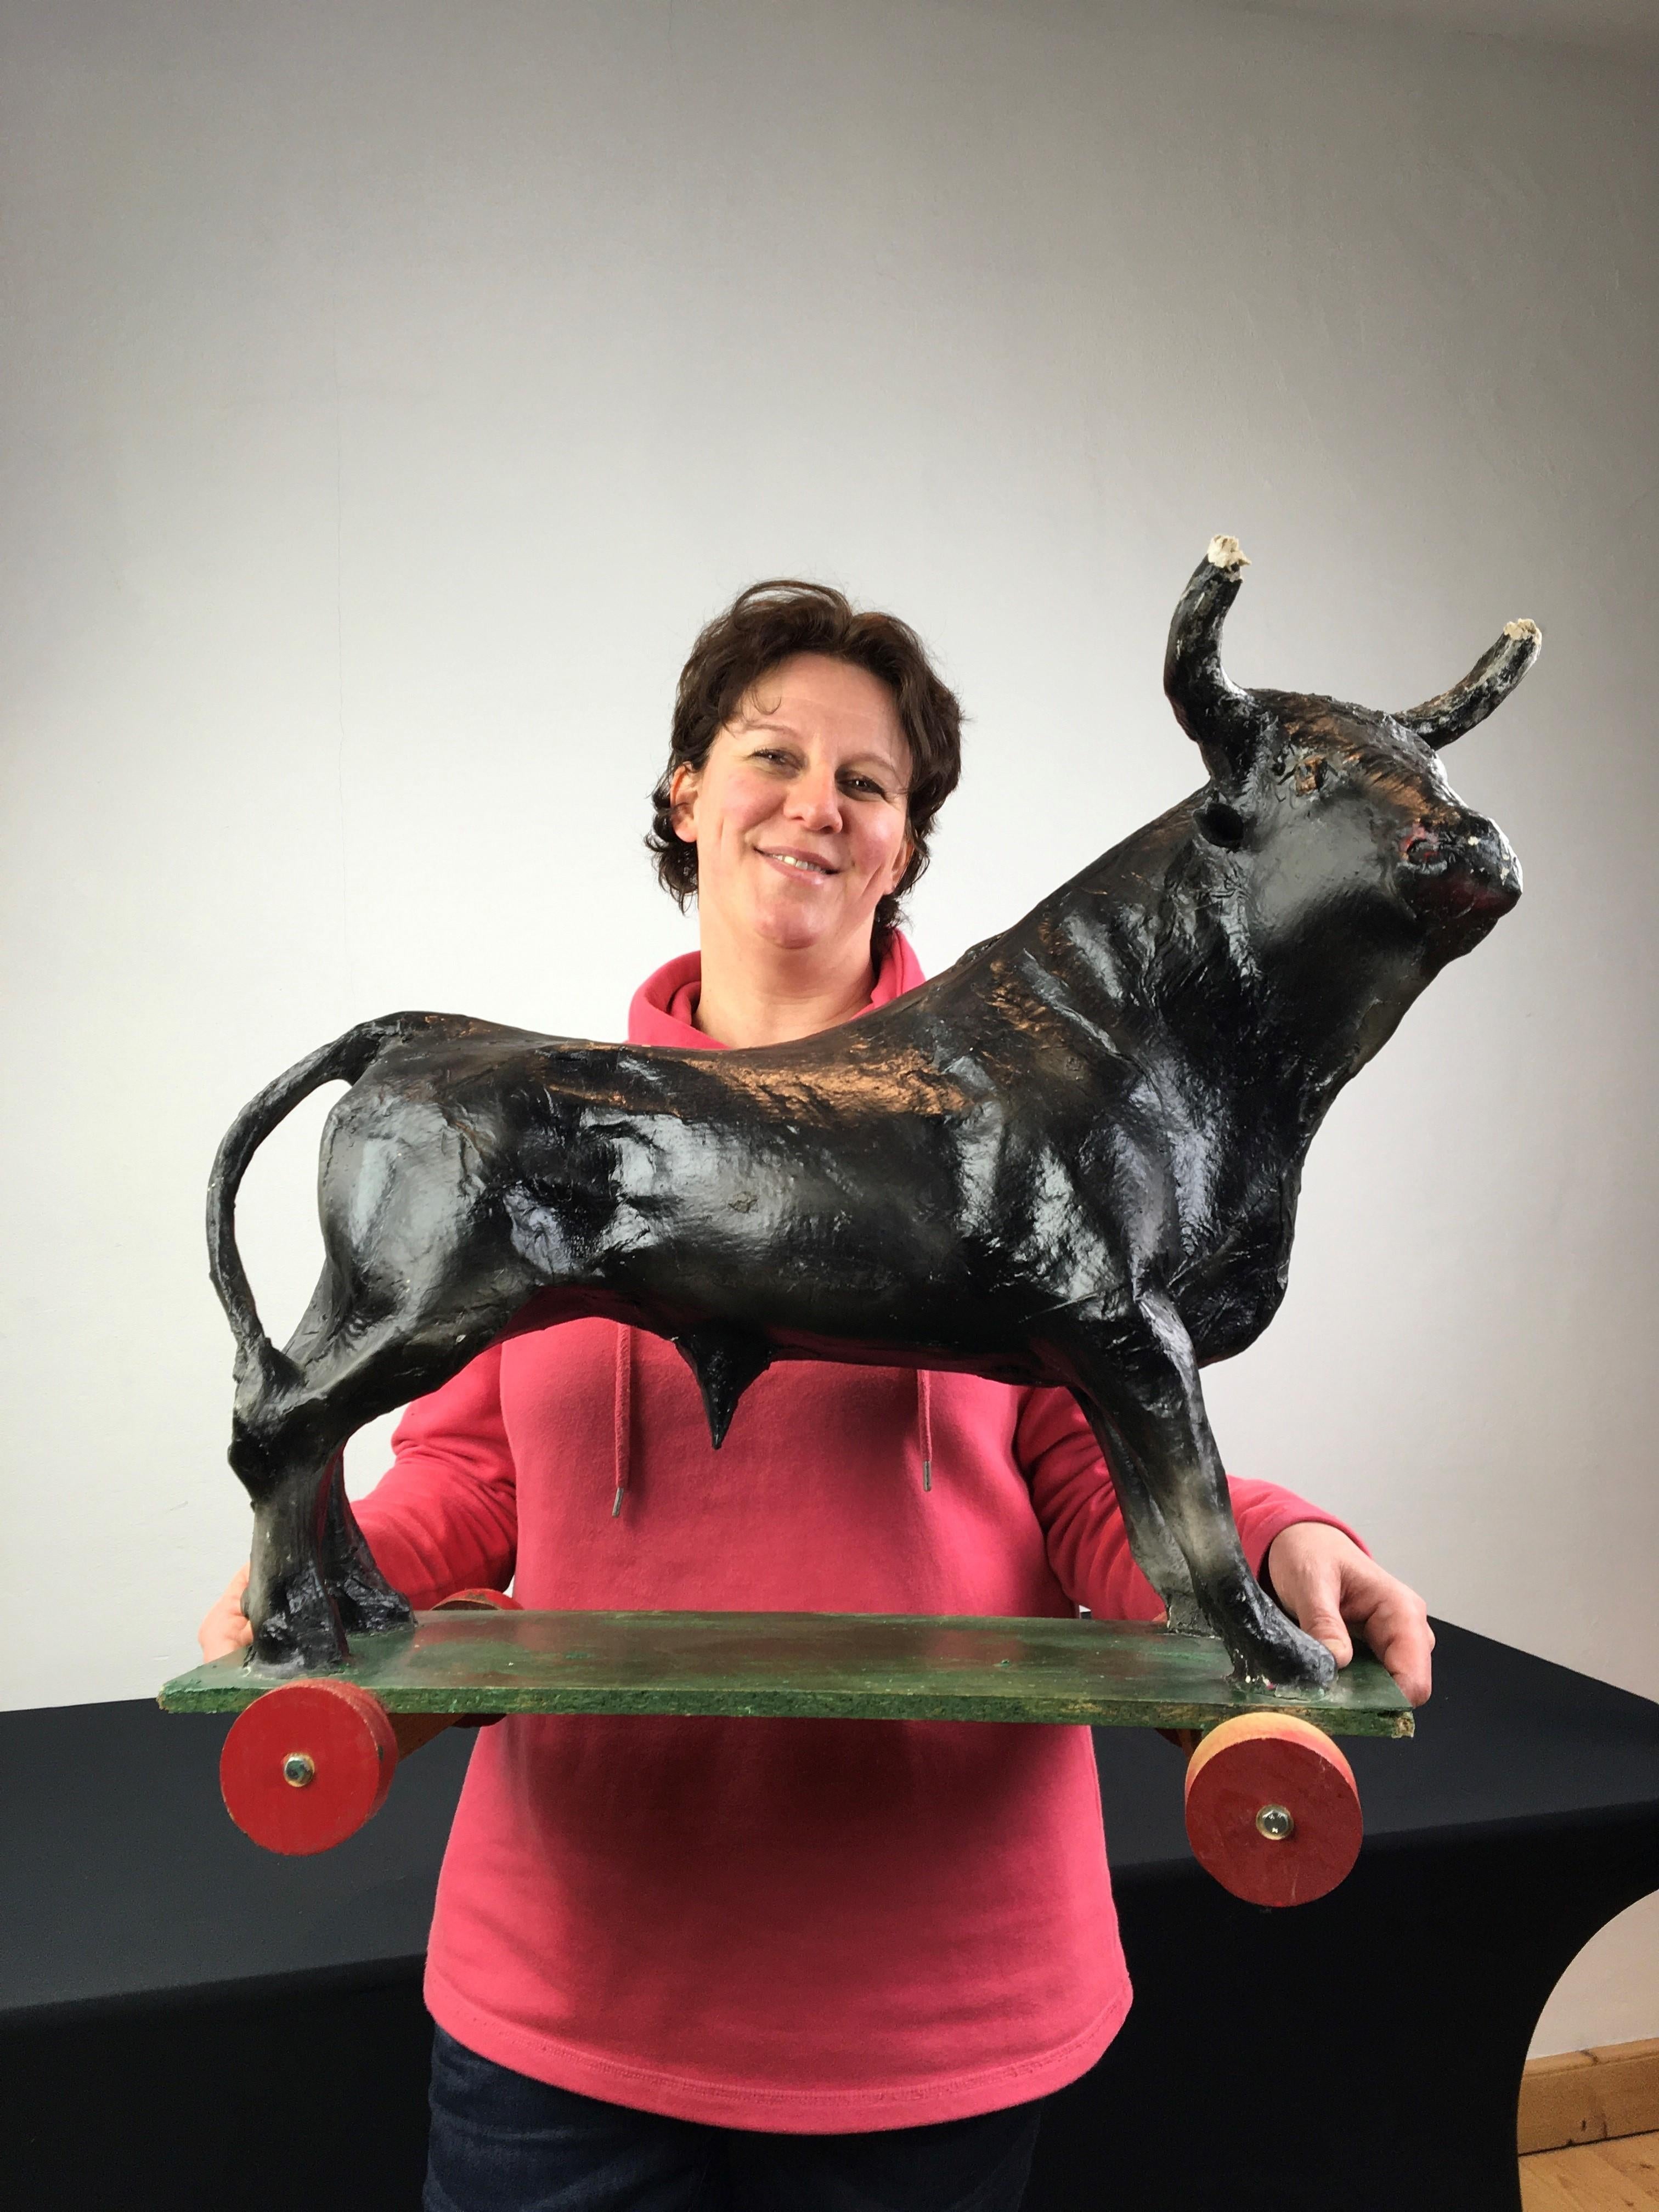 Paper Mache bull statue on wheels, bull animal on wheels.
A vintage paper mache toy on wooden plate with wheels.
Vintage toy - pull toy on wheels - collectable toy - collectible animal. 
This impressive black bull is a decorative item to place in